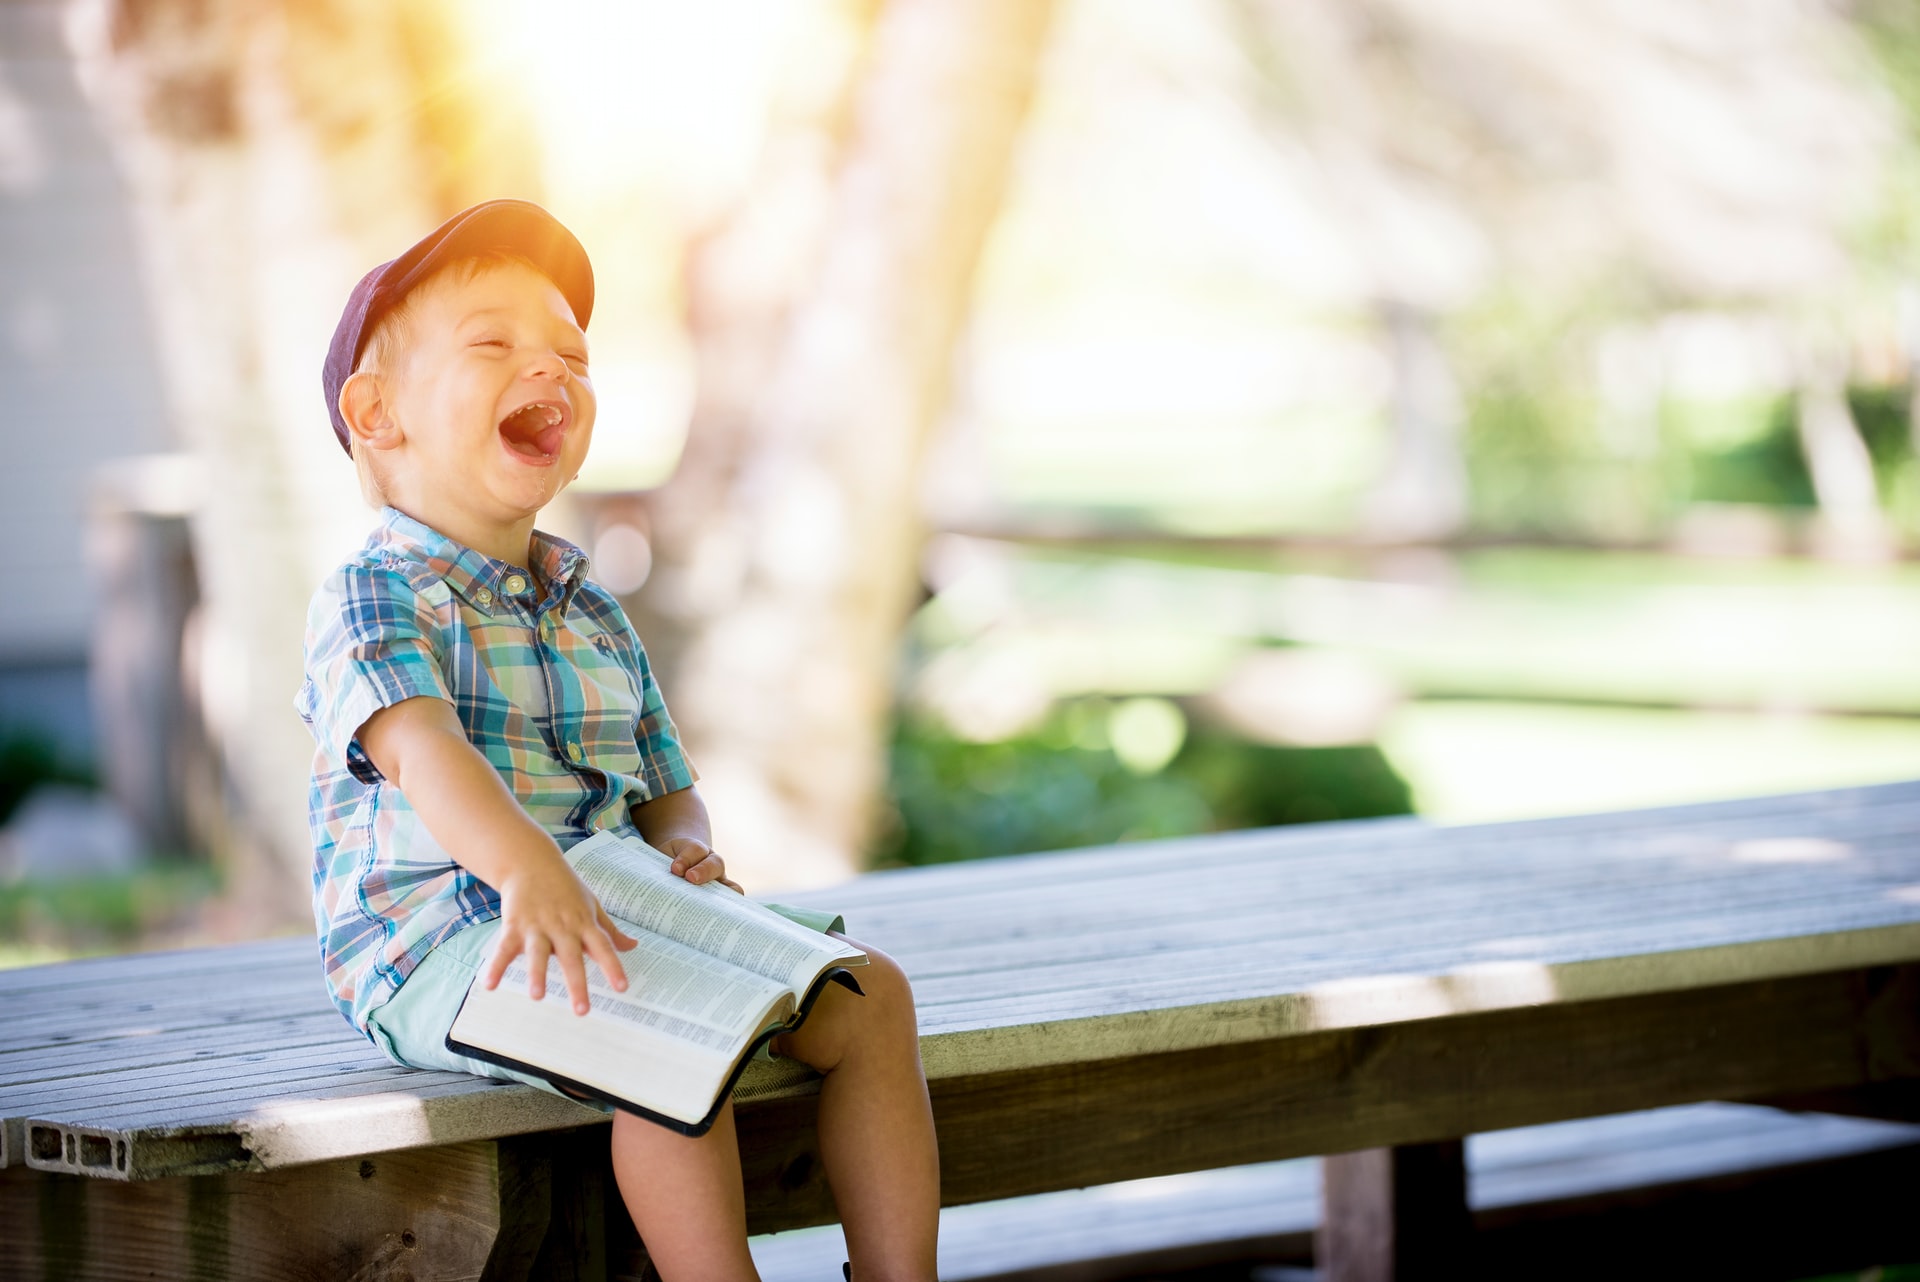 Daily walk in our childlike innocence - image of young boy holding a Bible while laughing.